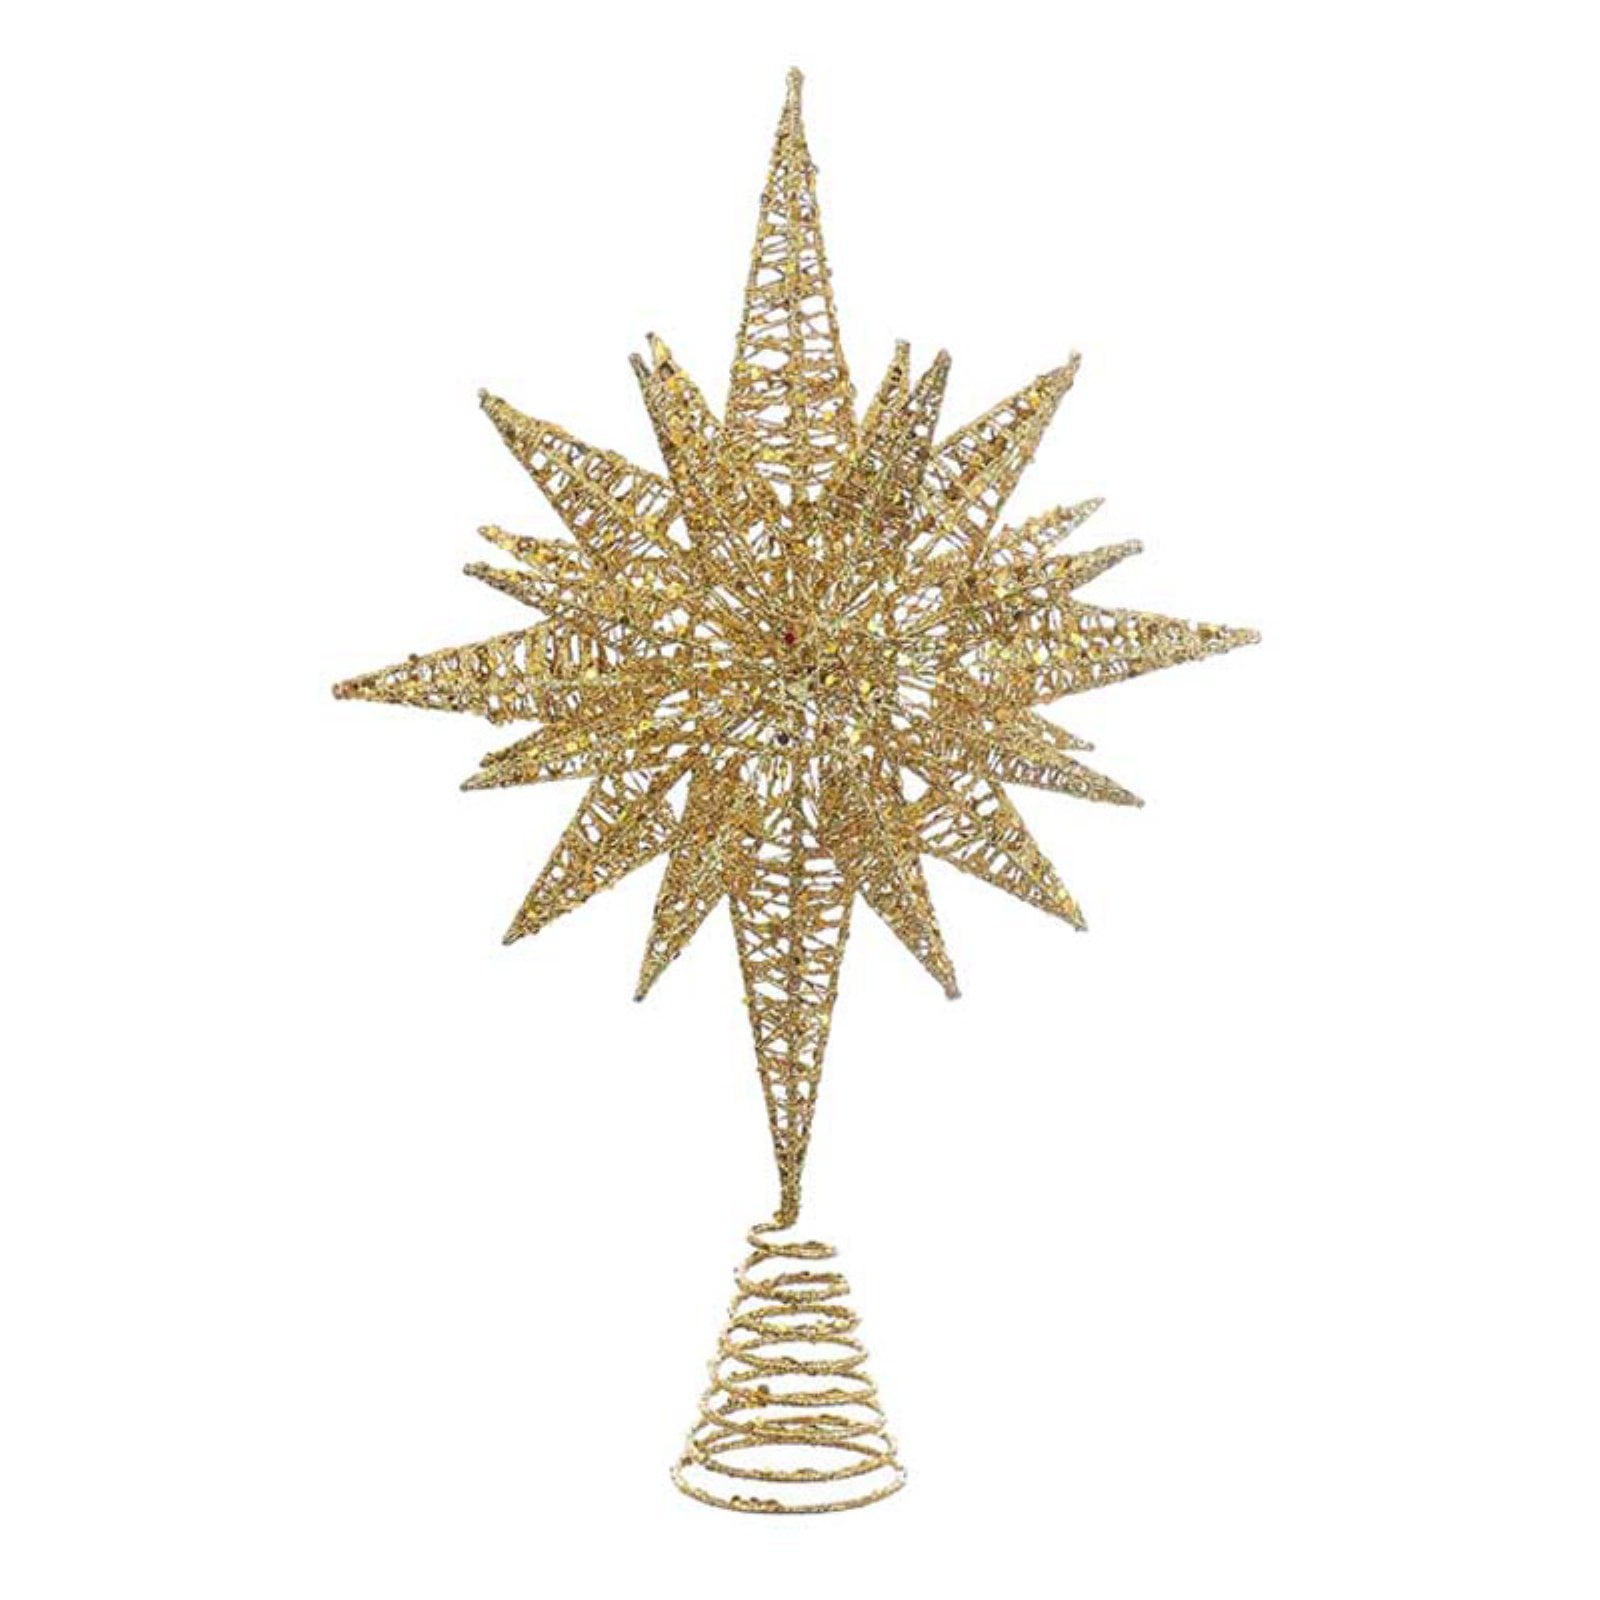 4 Seasons of Elegance Gold Glittered Snowflake Six-pointed Star Christmas Ornament for sale online